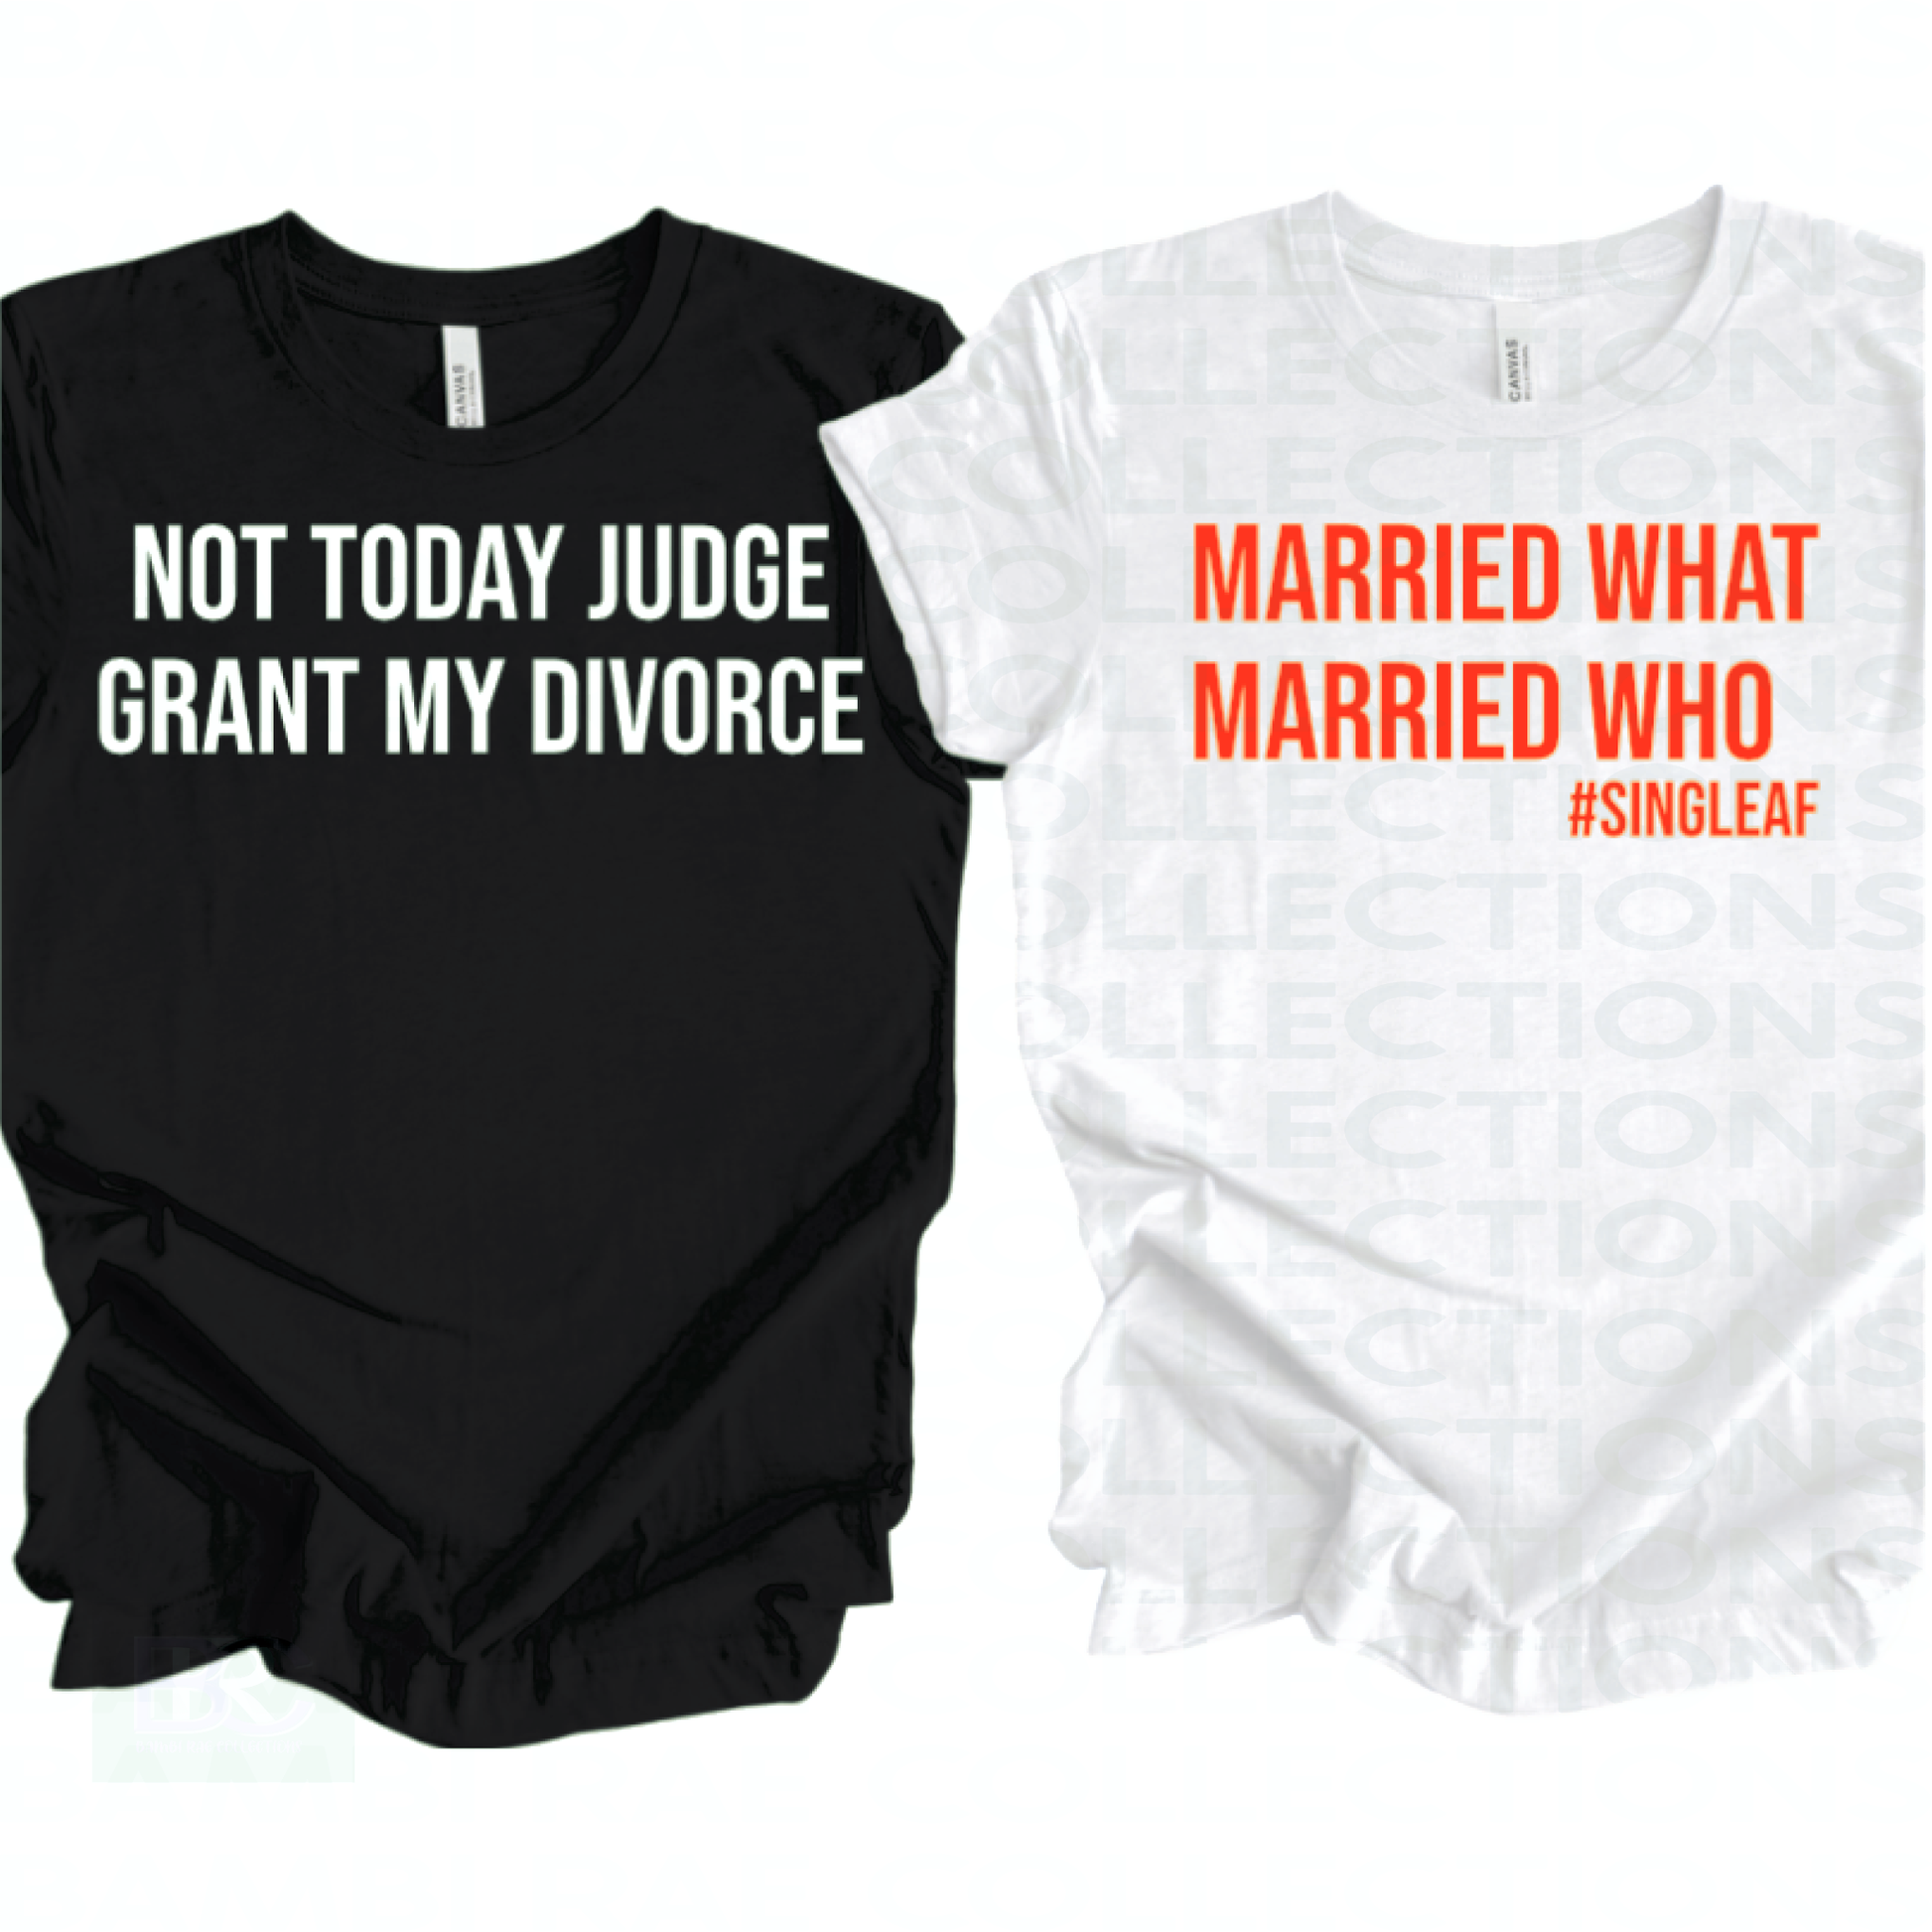 one black shirt with the words "not today judge grant my divorce" on it with white lettering on it, and one white shirt with the words "married what married who hashtag singleAF" in red lettering on it